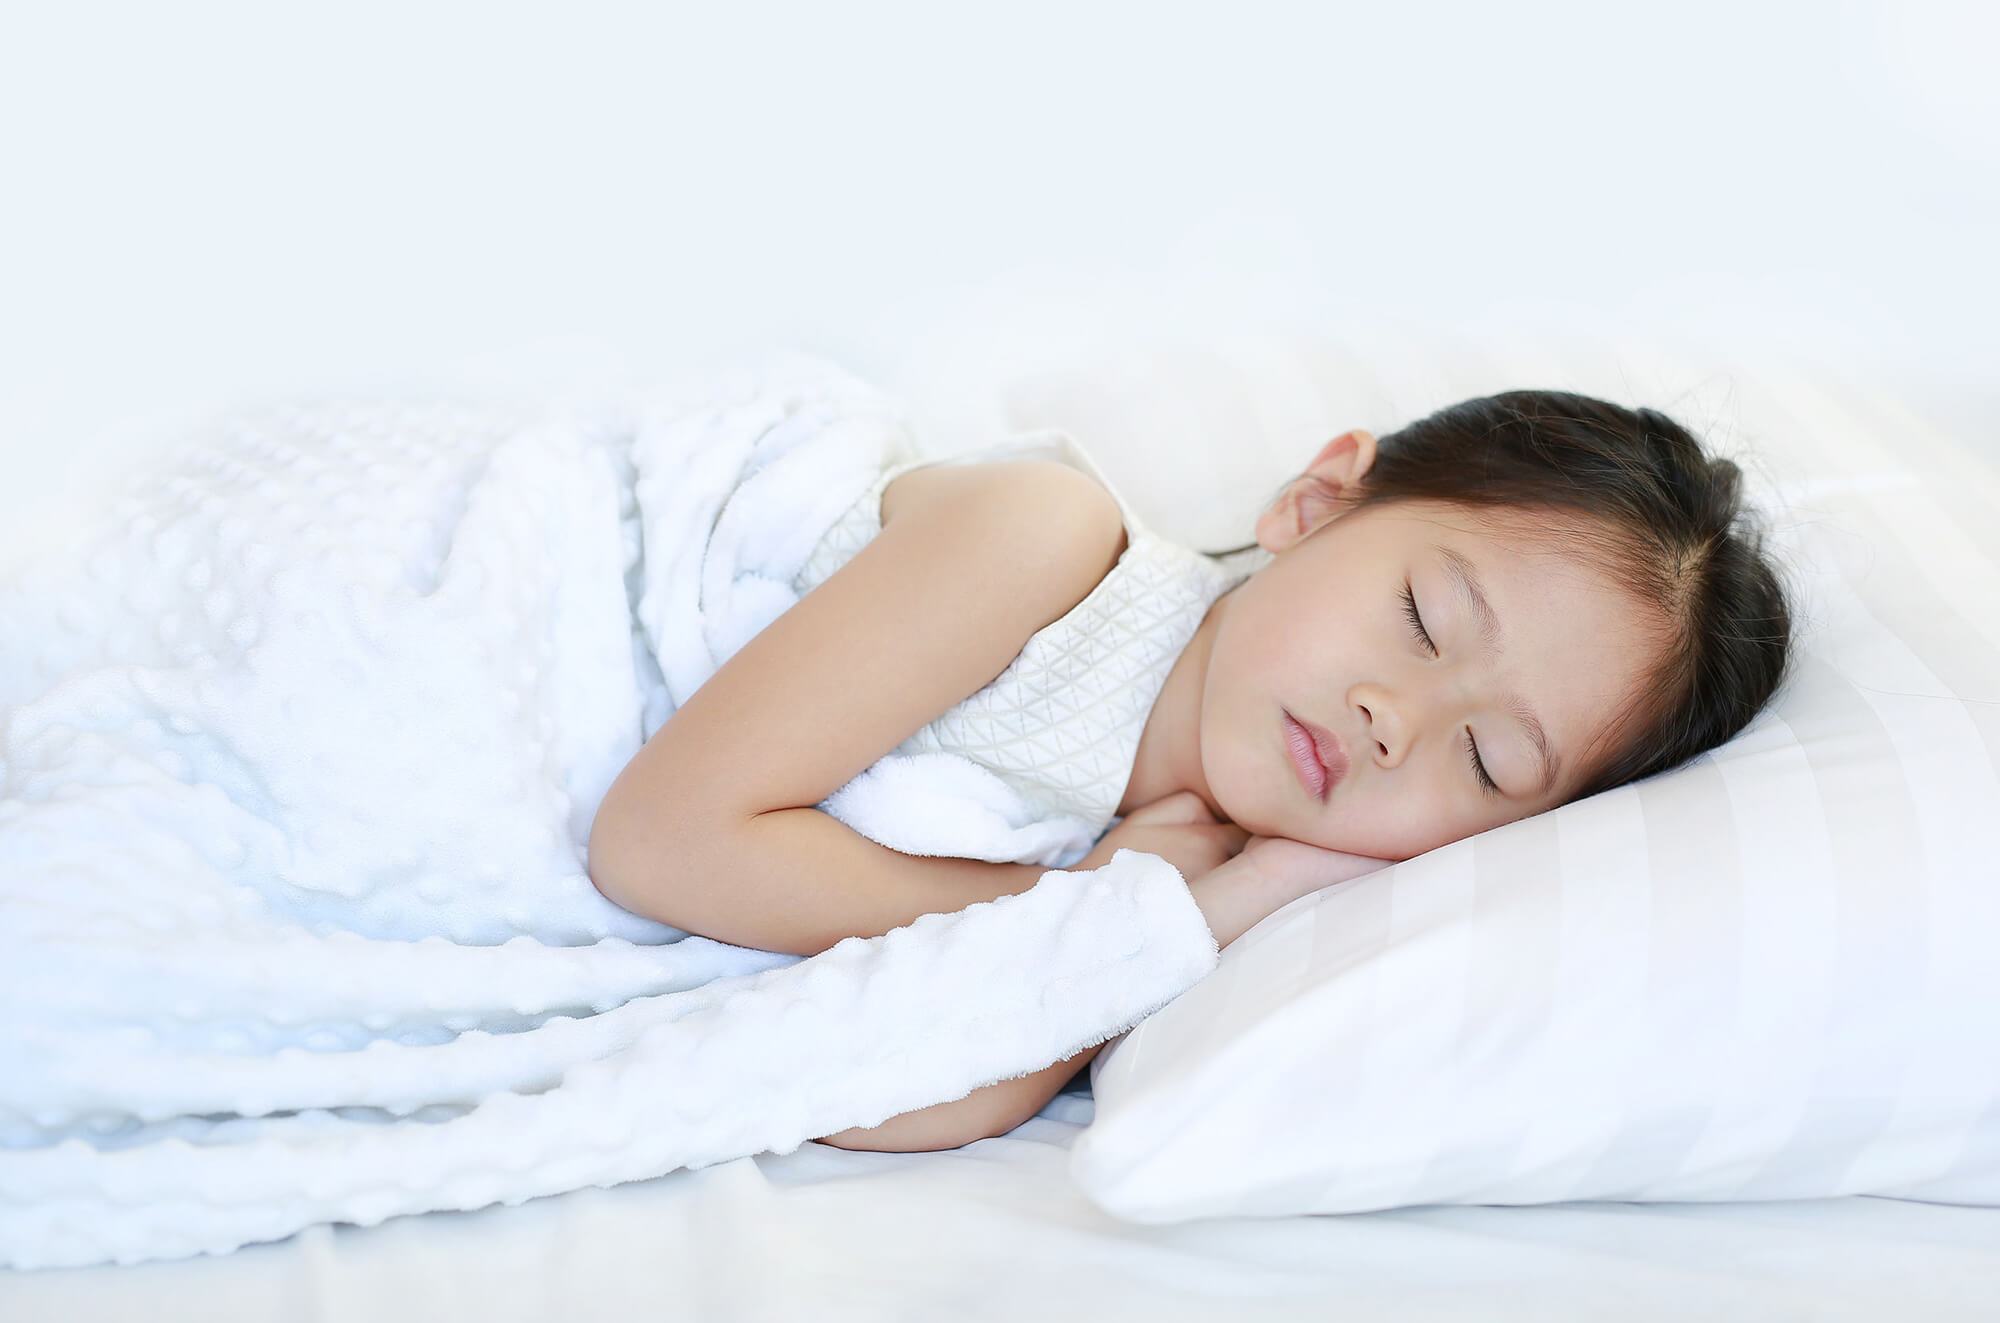 What Causes Snoring in Children?